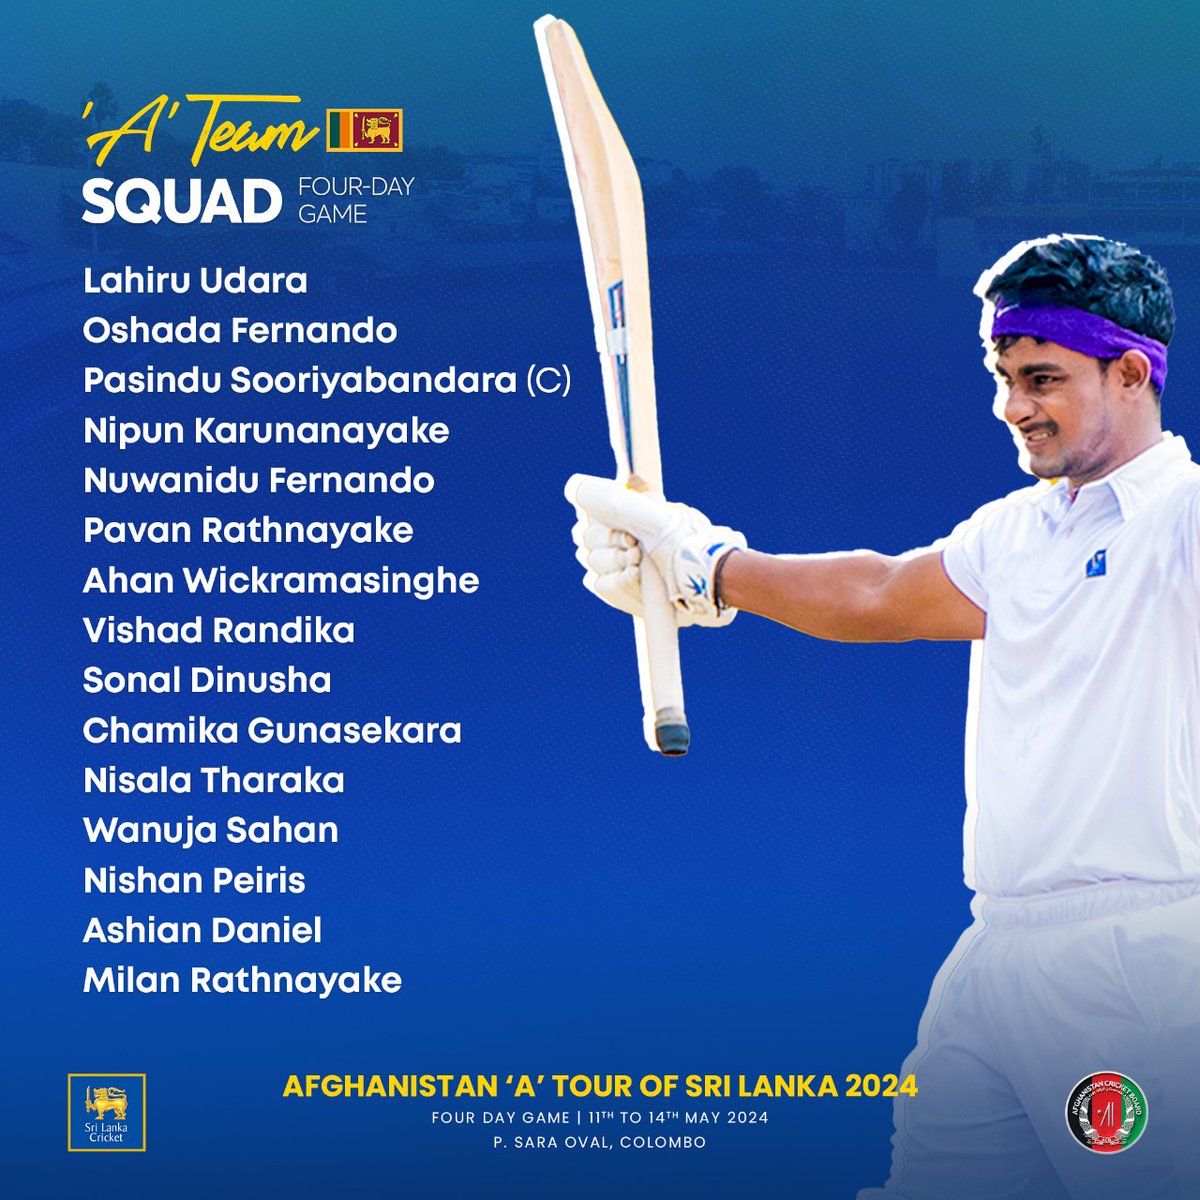 The Cricket Selection Committee selected the following 15-member Sri Lanka ‘A’ team to take part in the four-day game against Afghanistan ‘A’ team. #SLATeam #SLvAFG